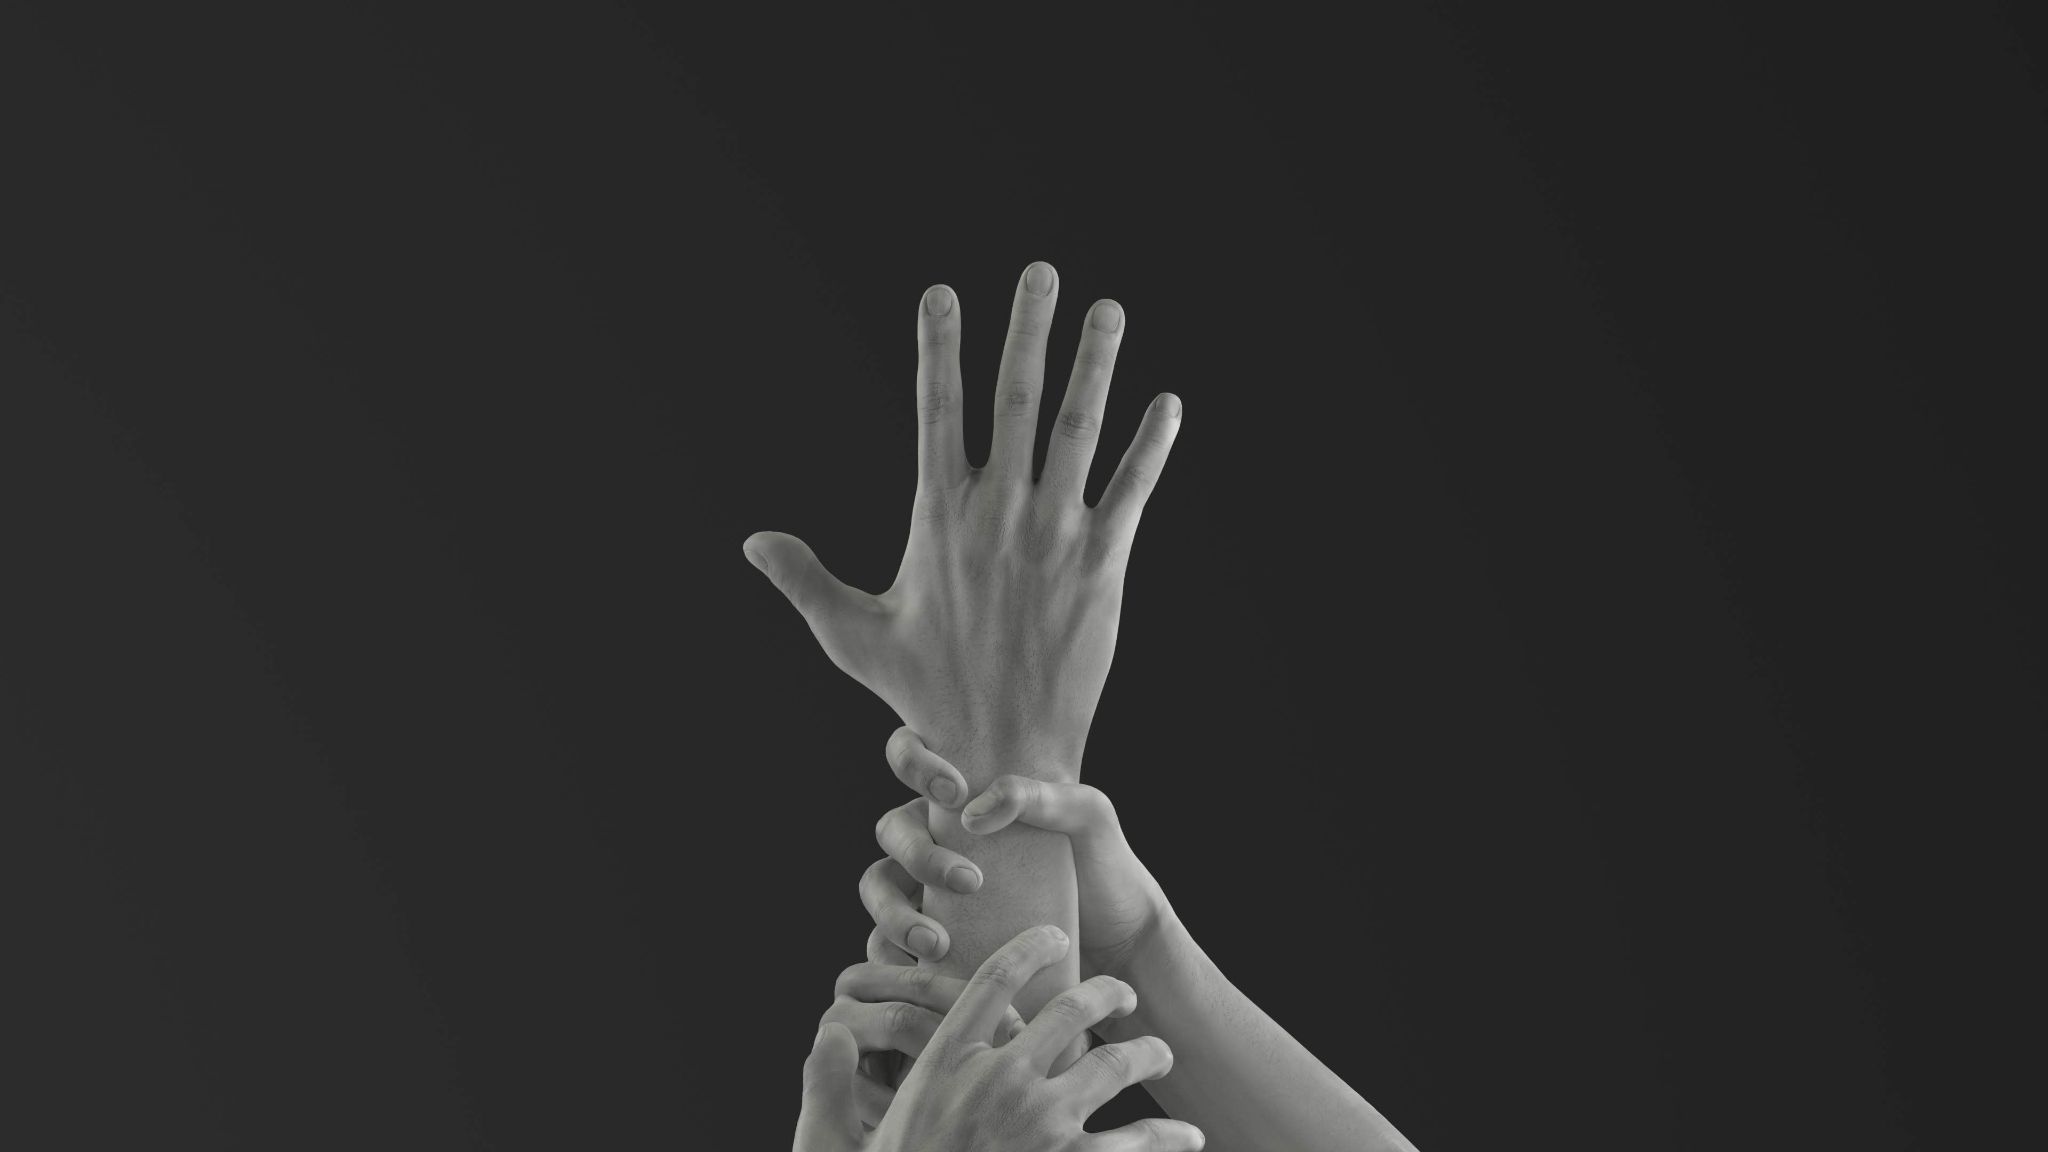 A picture of several hands restraining another hand, representing "My hand had a mind of its own."